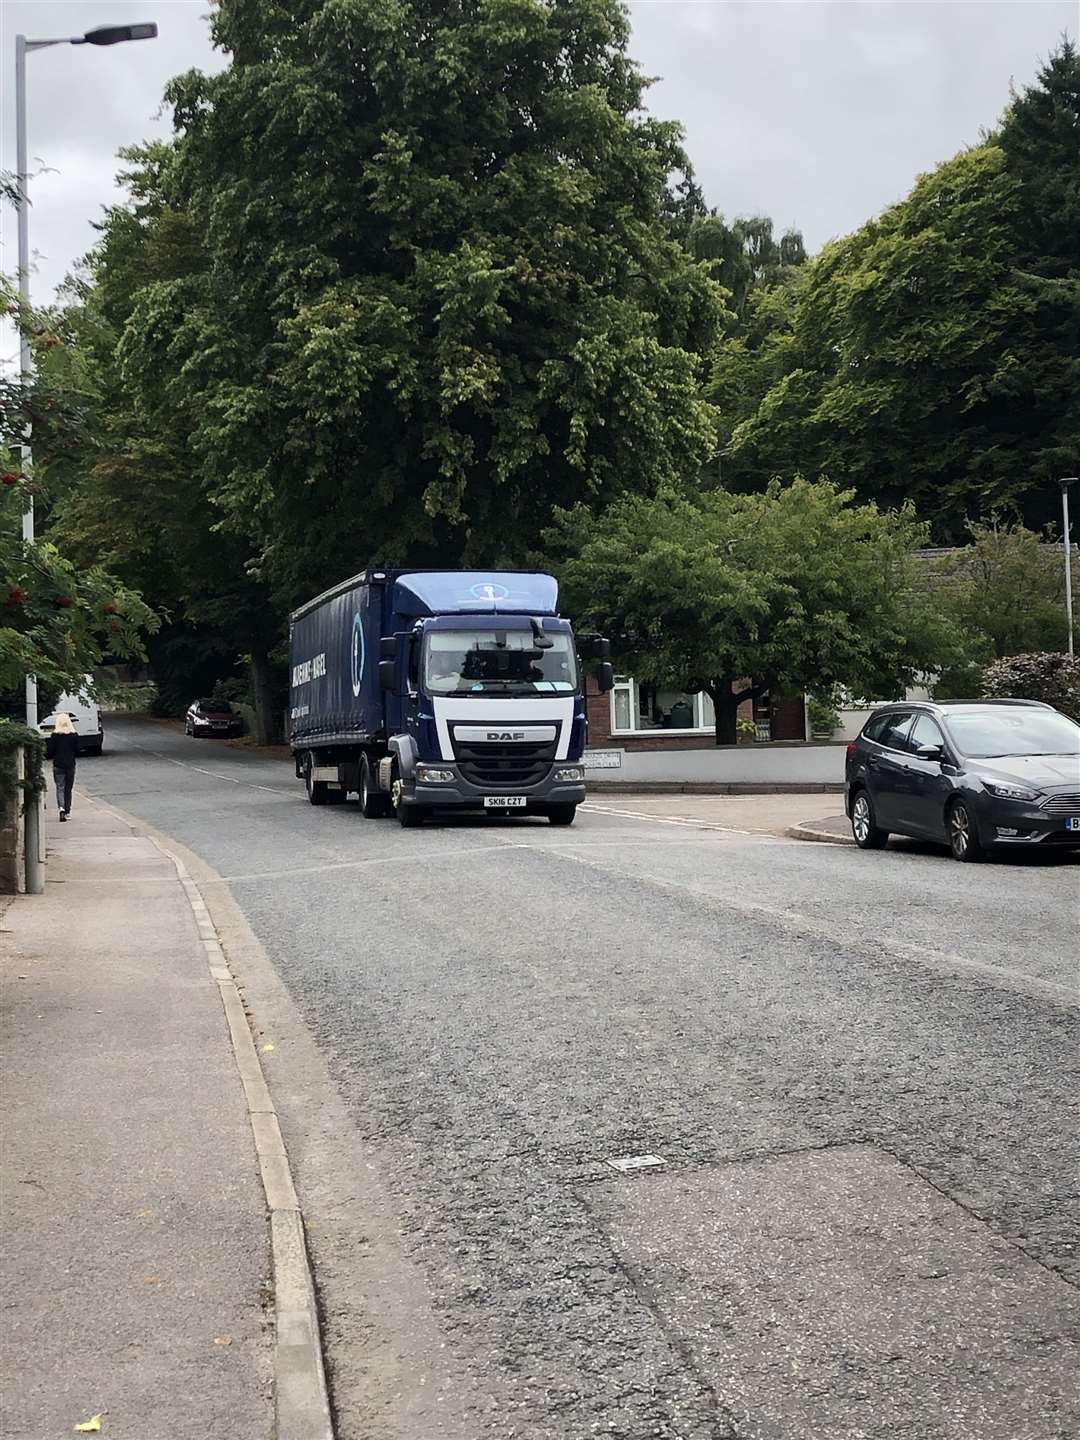 Heavy goods vehicles are becoming more familiar on St Leonard’s Road.